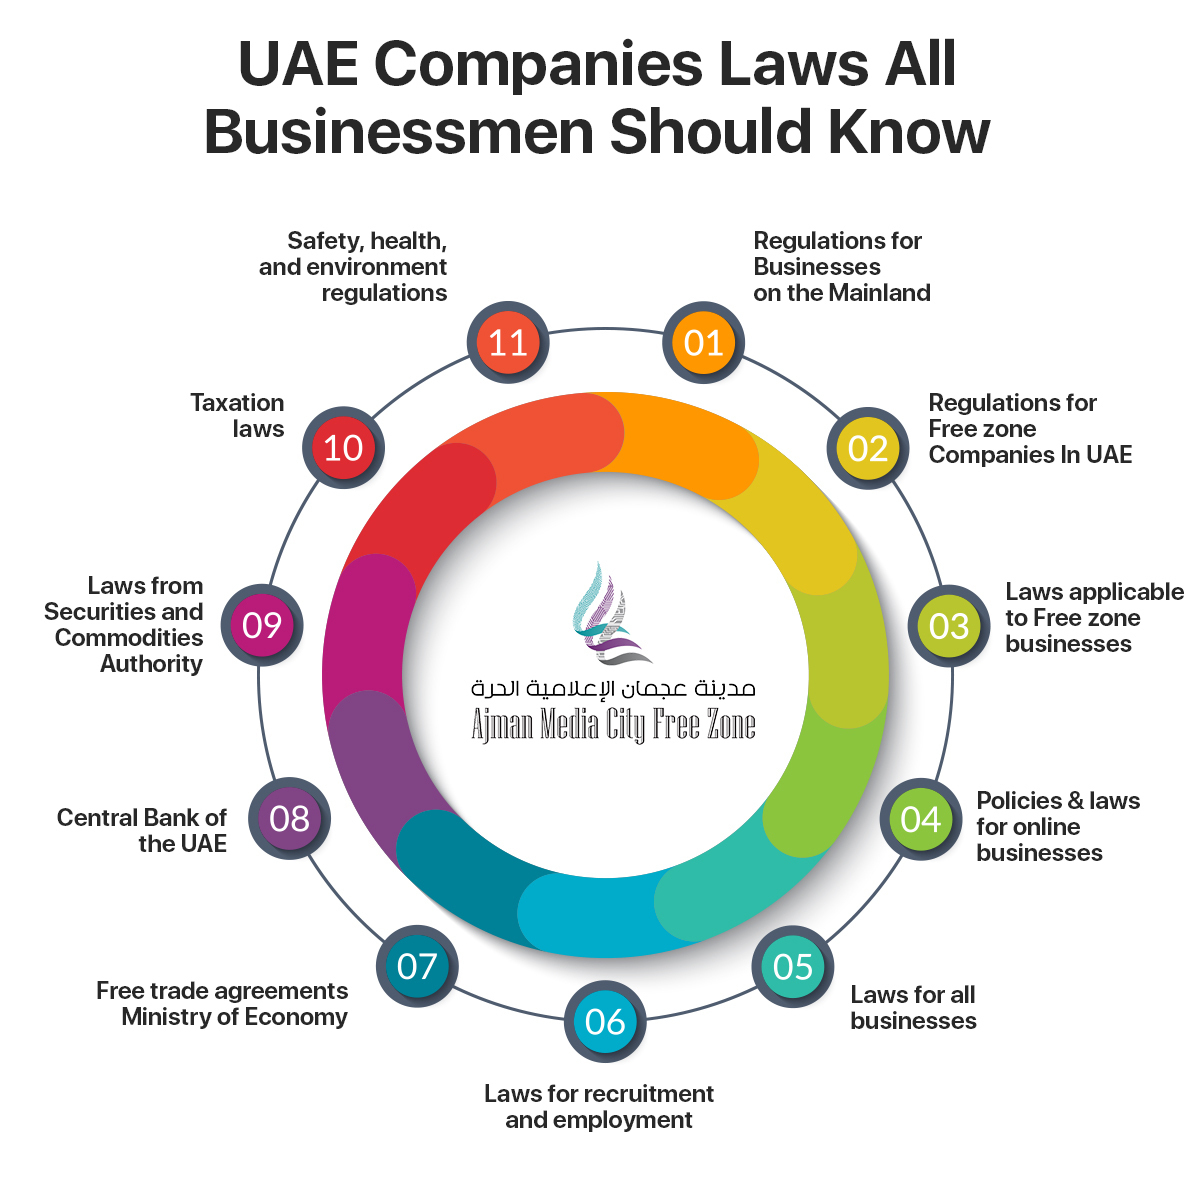 UAE Companies Laws All Businessmen Should Know